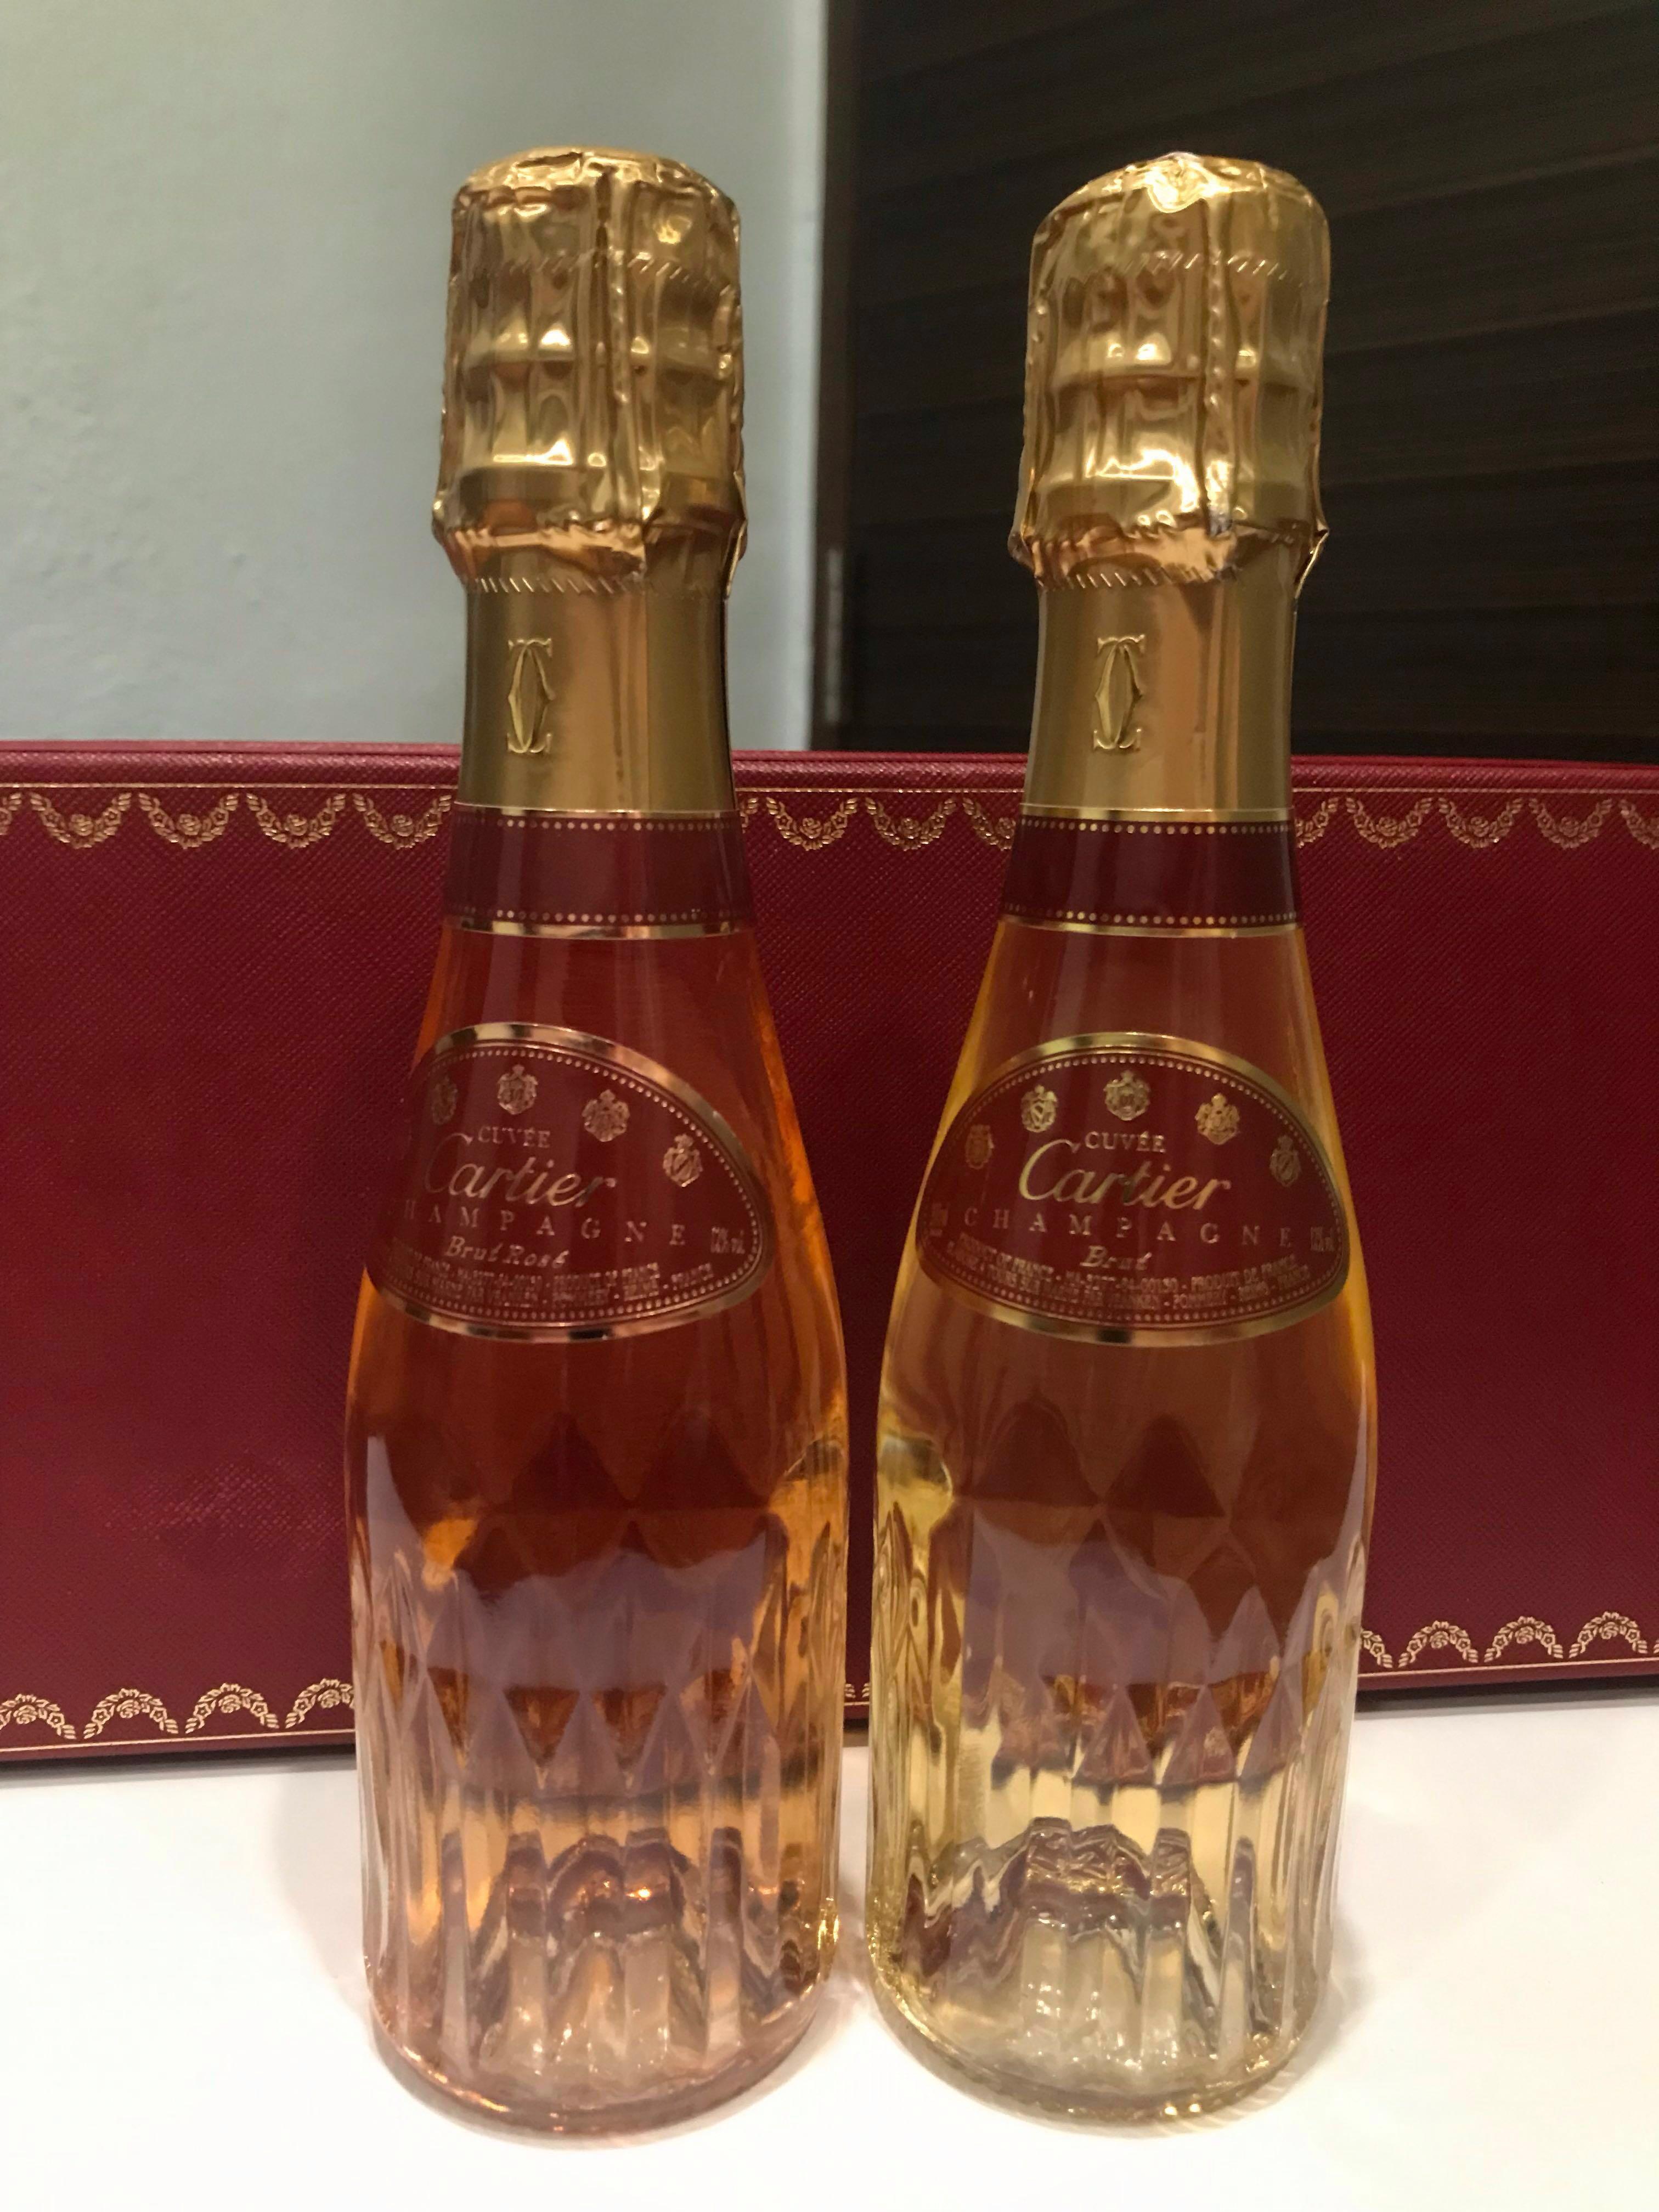 cartier champagne price uk